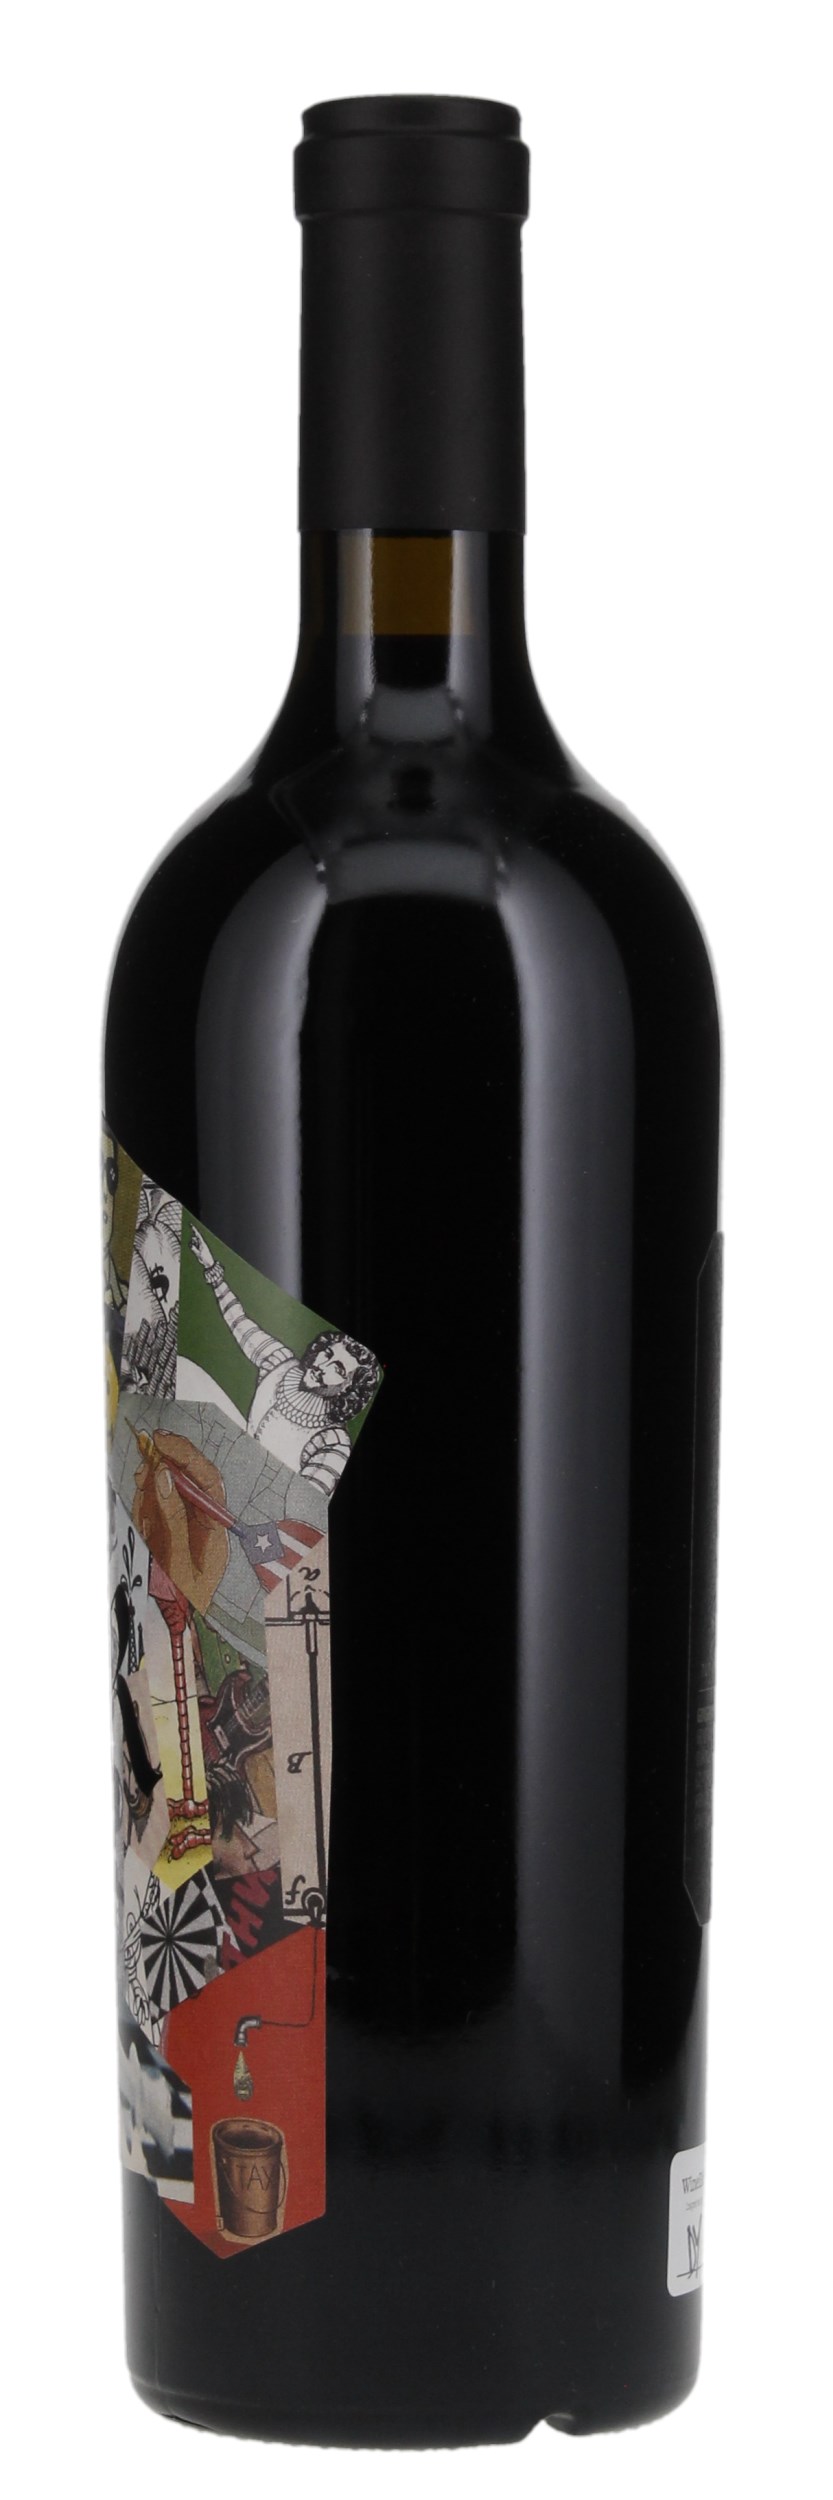 2013 Realm The Absurd, 750ml